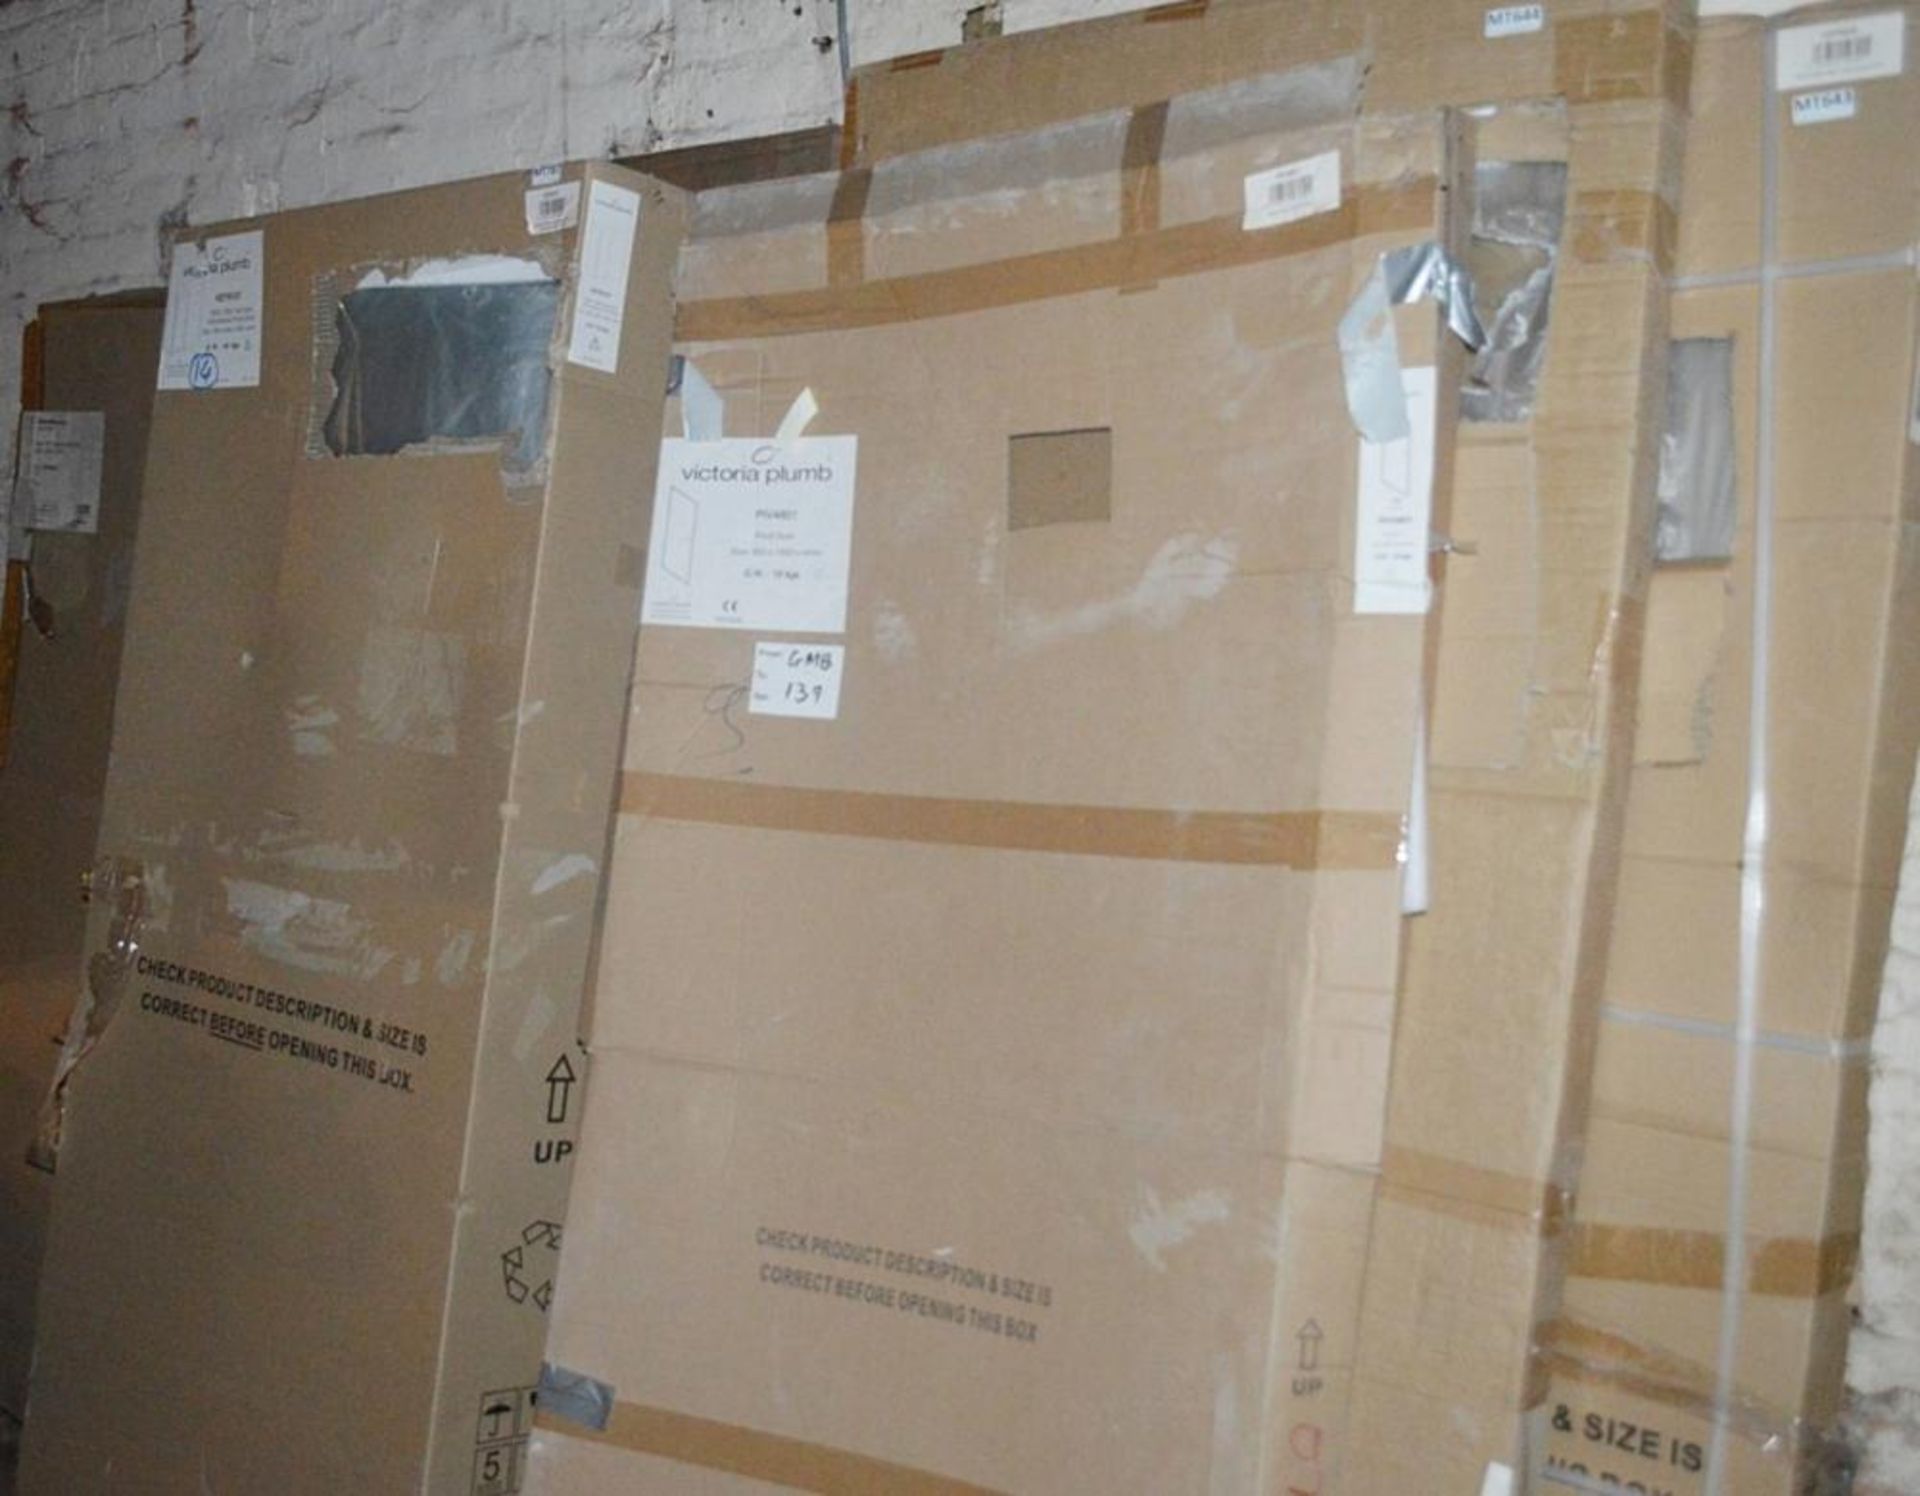 13 x Assorted Shower Screens And Panels - RefMT787 + Ref731 - New / Unused Boxed Stock - CL269 - Loc